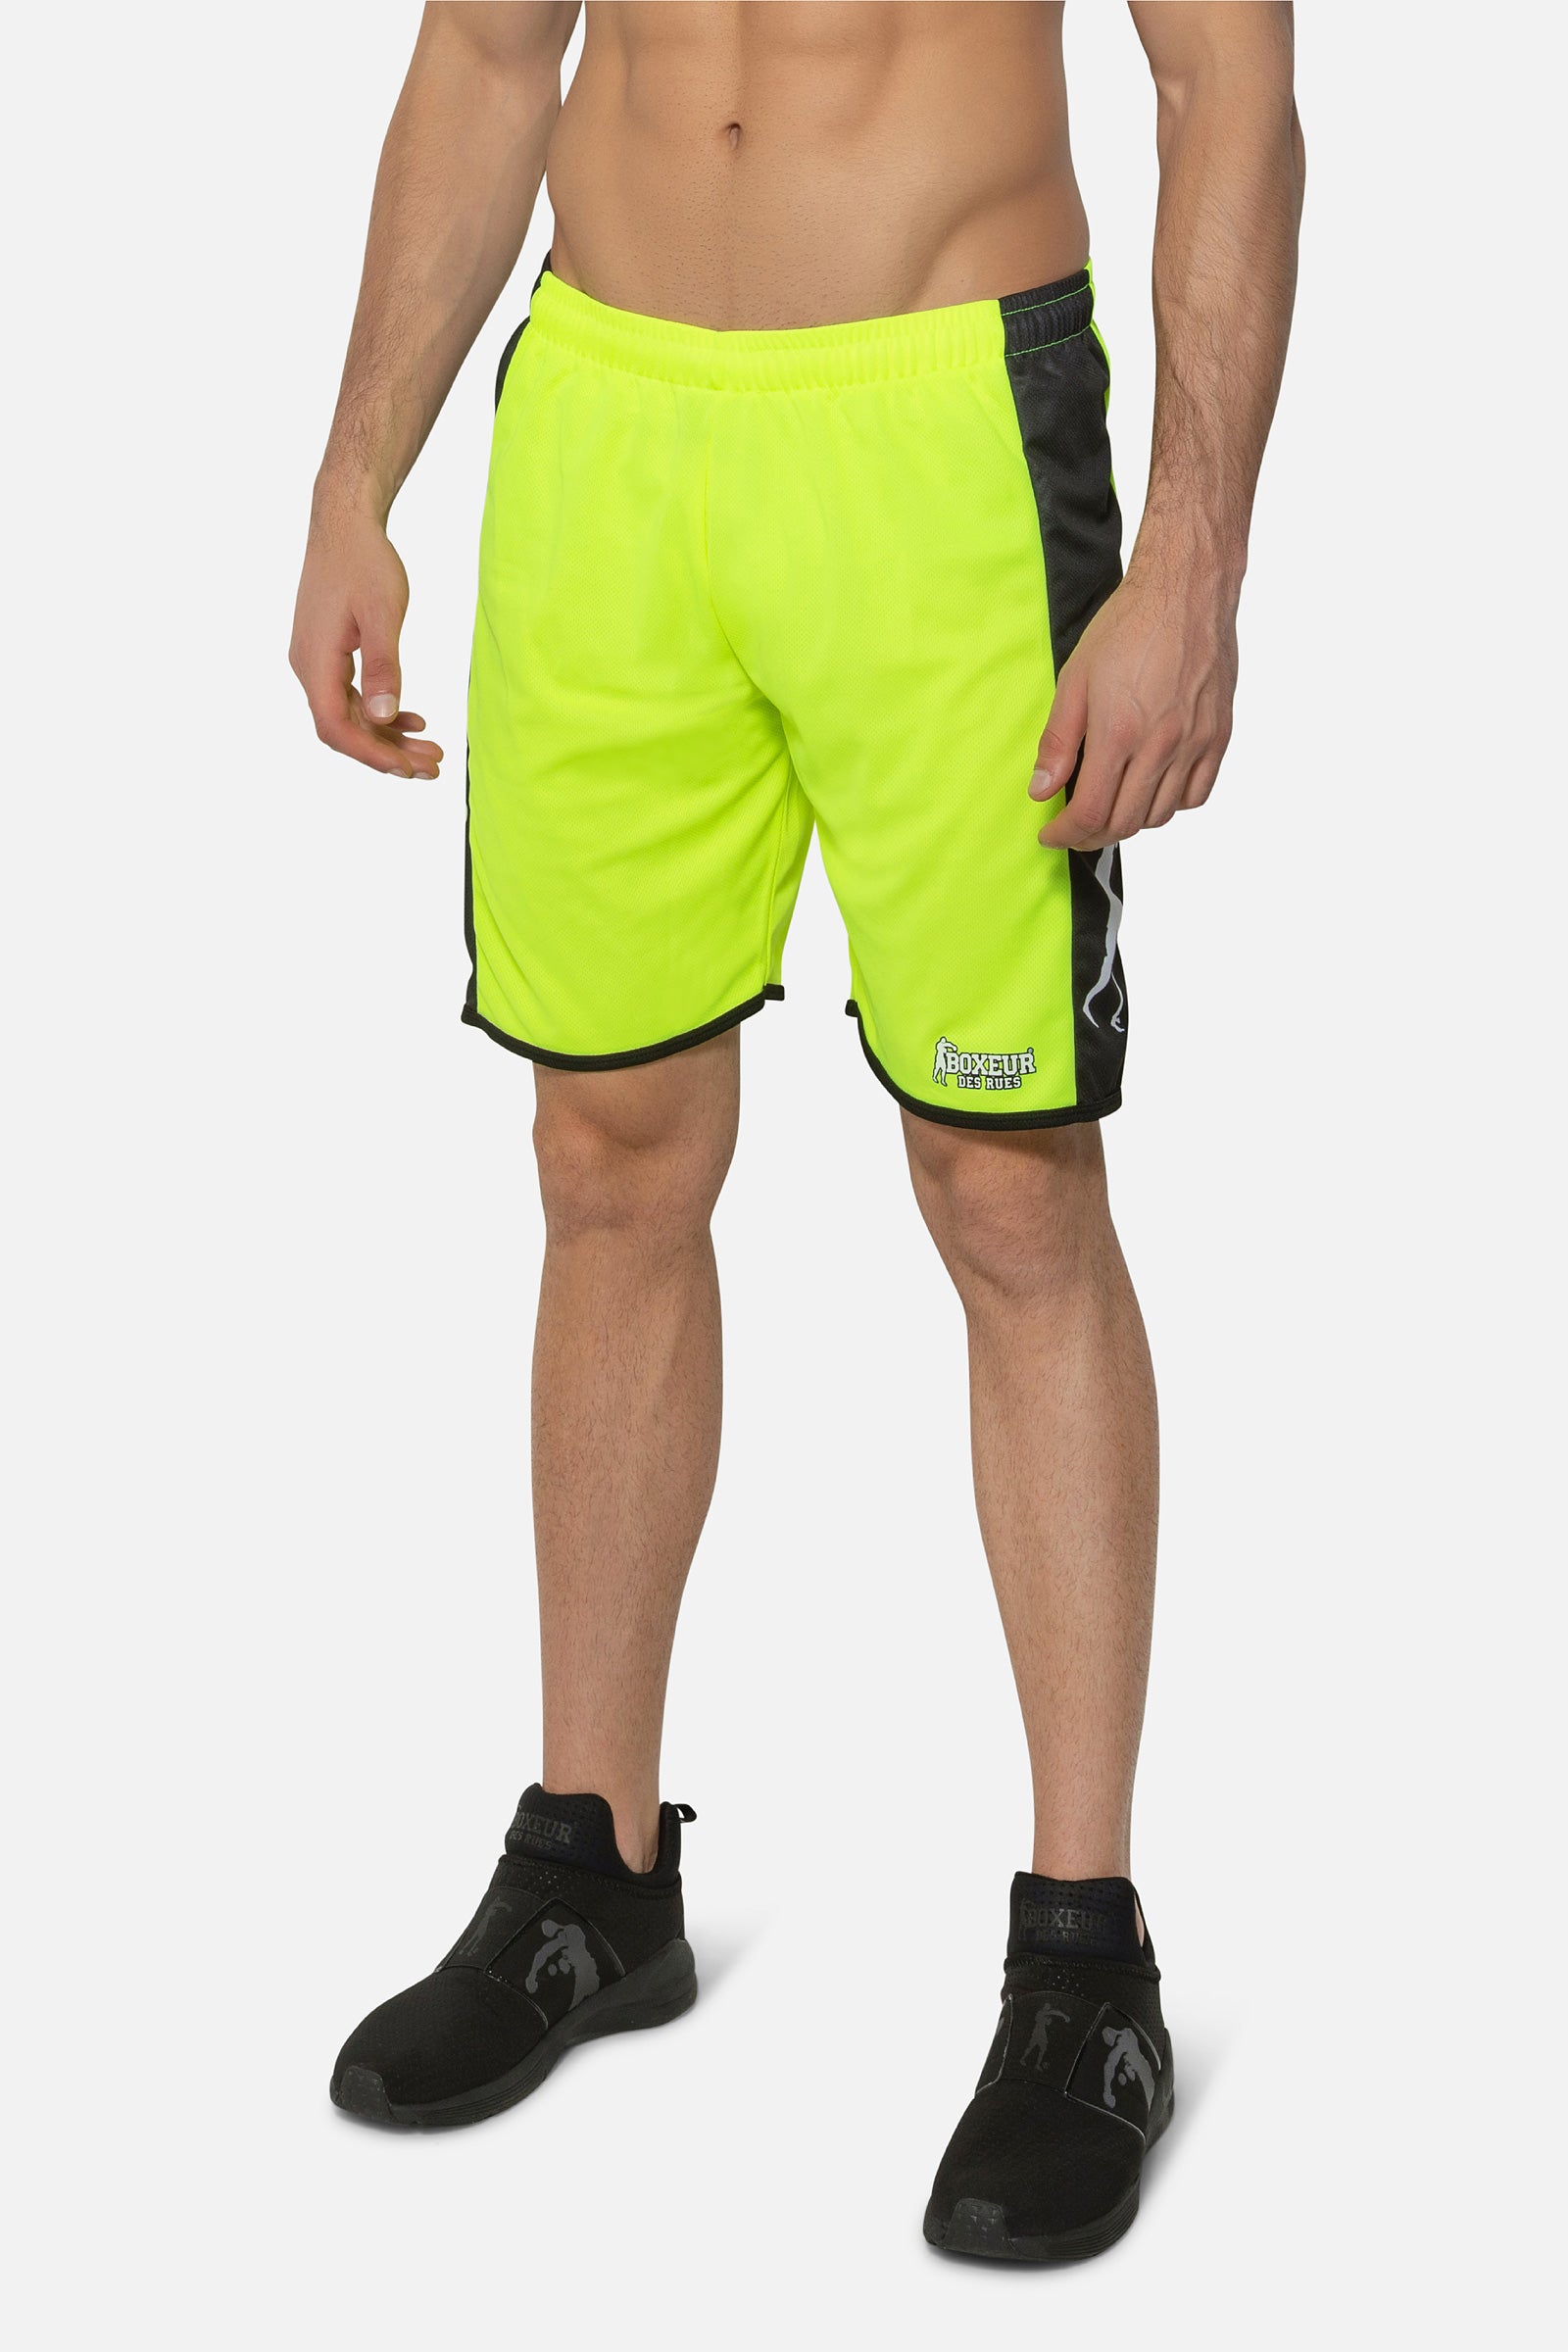 Soccer Basic Shorts in Yellow Shorts Boxeur des Rues   